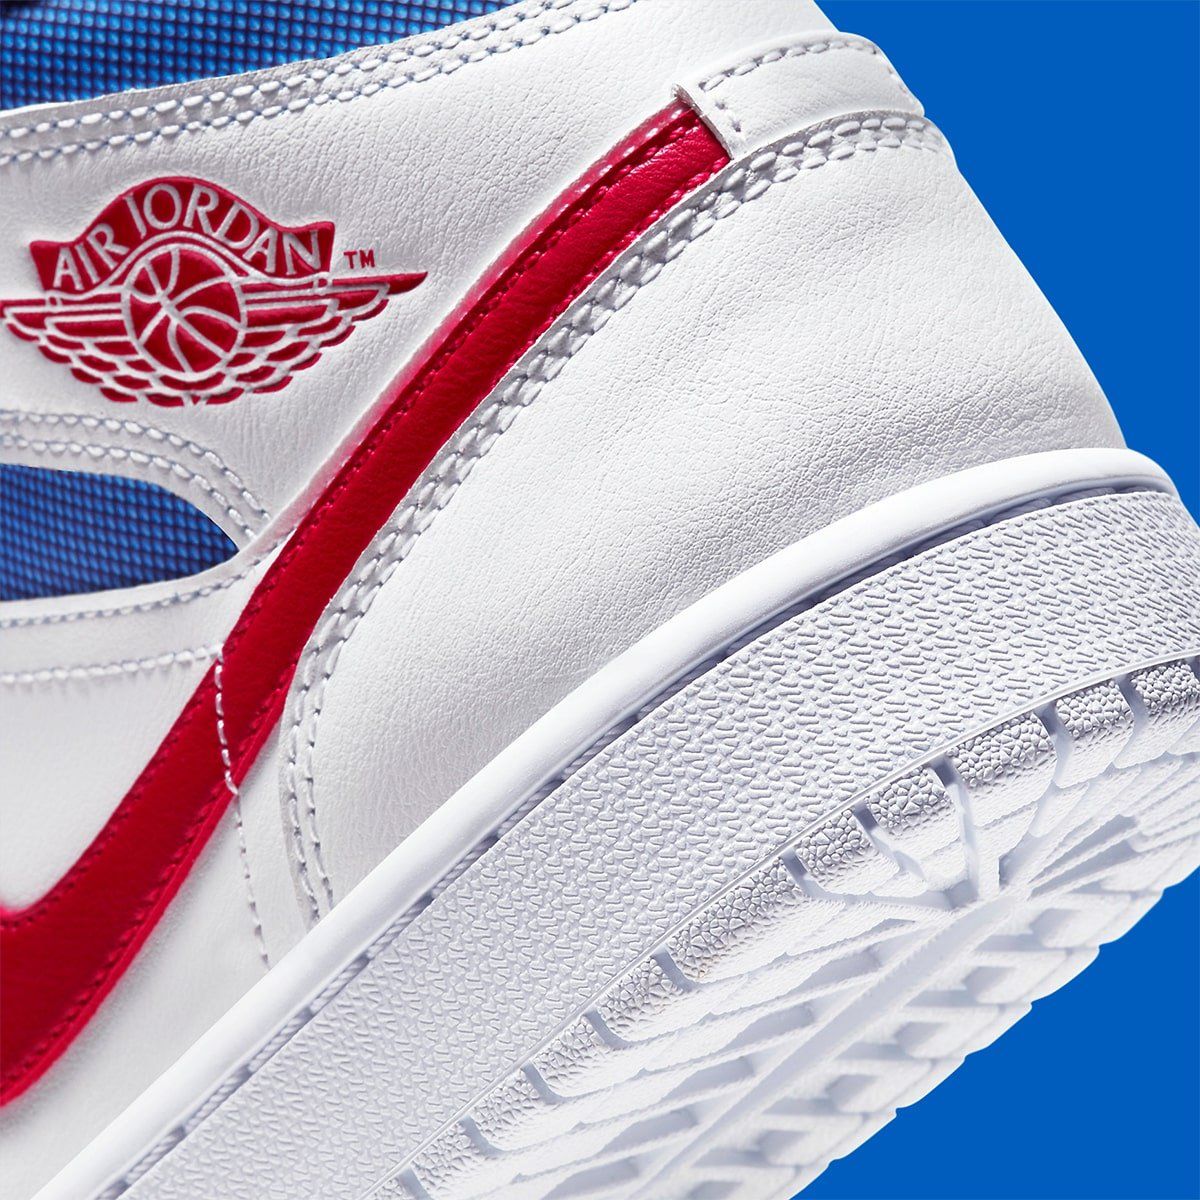 The Air Jordan 1 Mid Gets a Little Patriotic | HOUSE OF HEAT